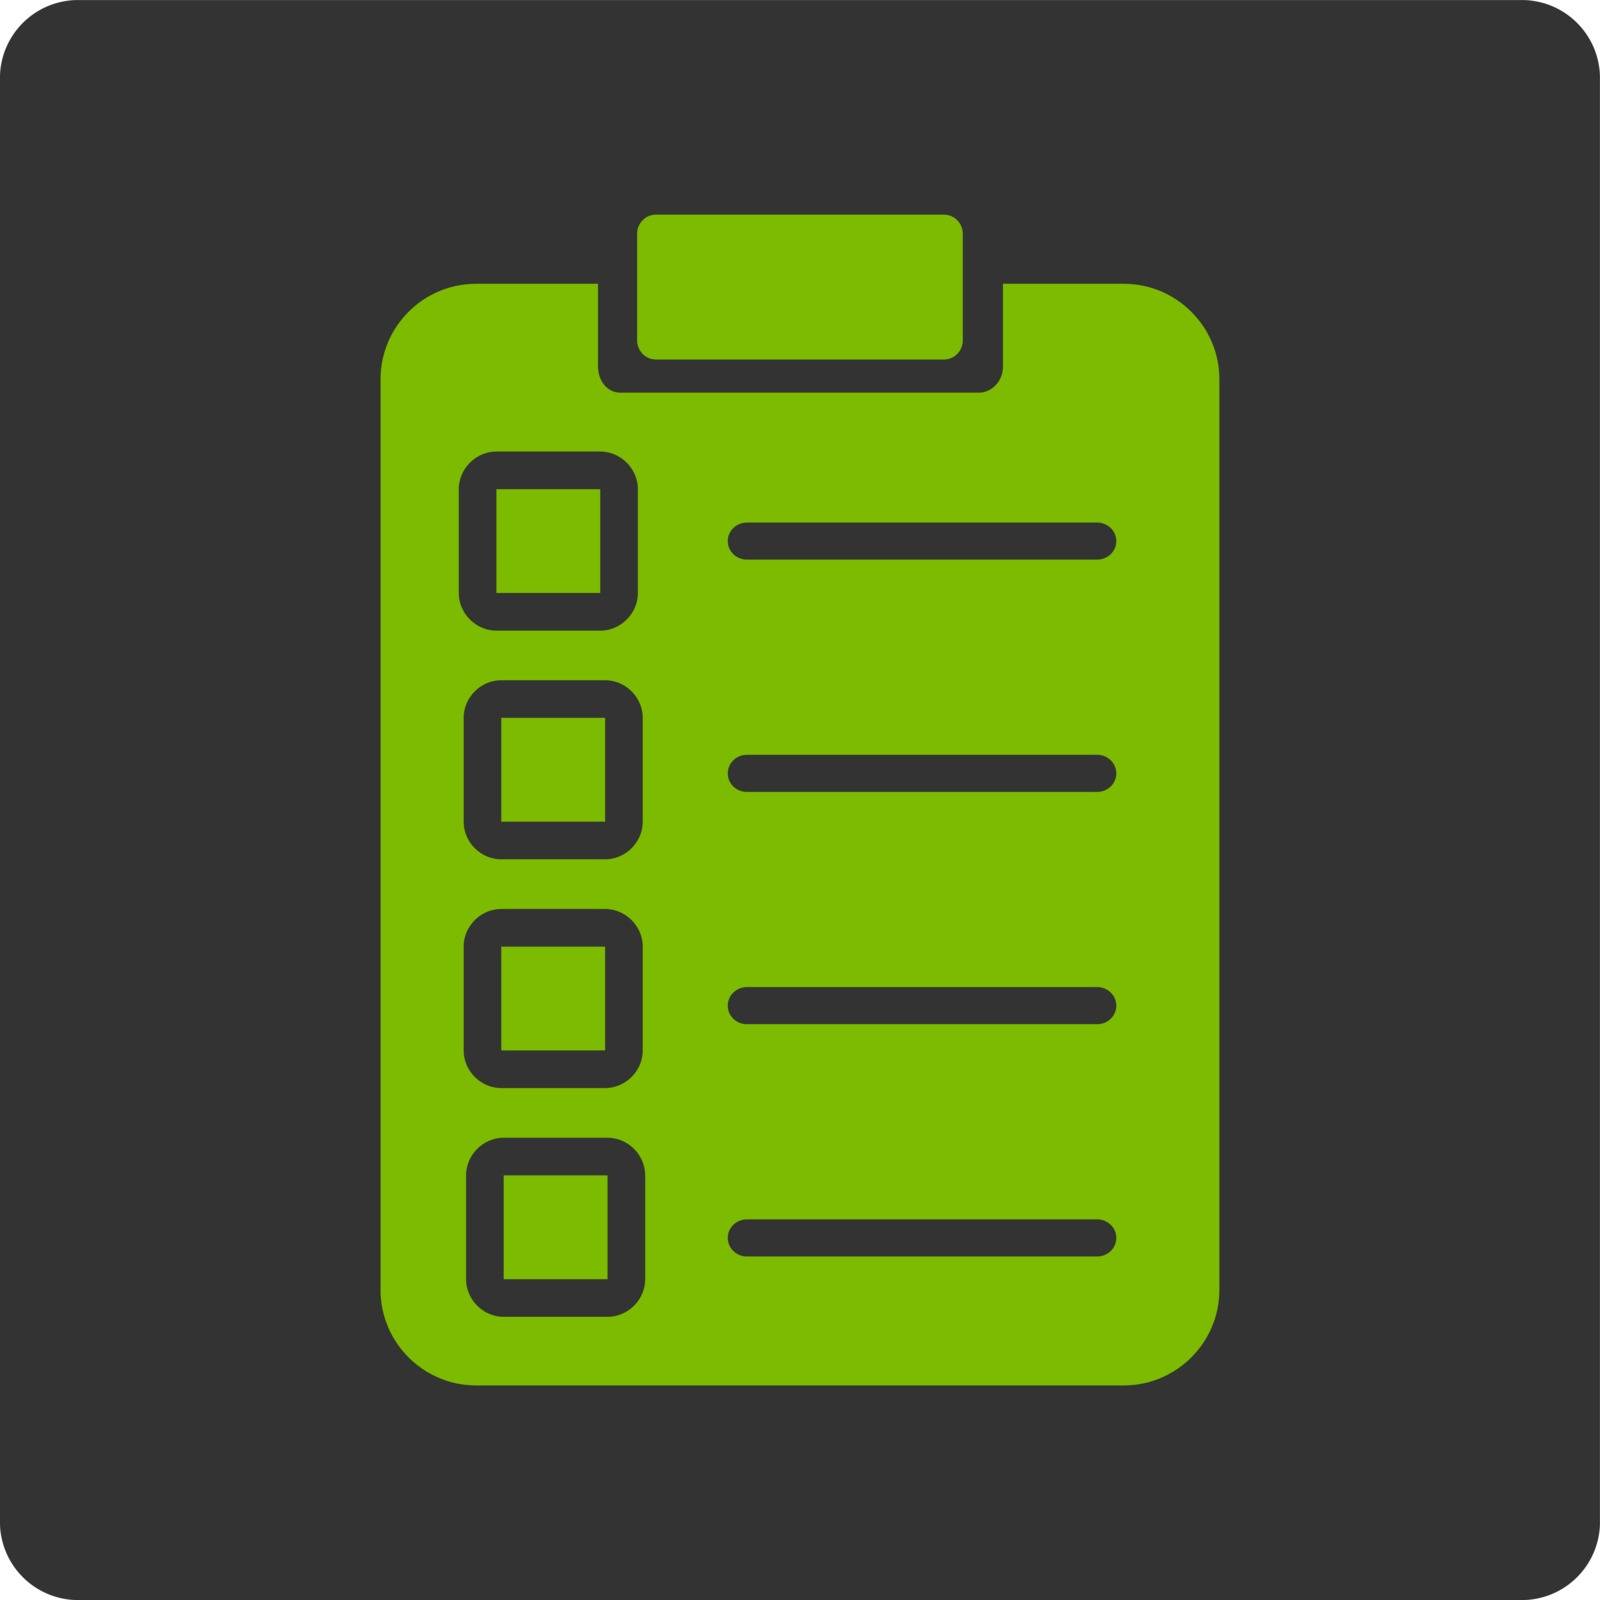 Test task icon. Vector style is eco green and gray colors, flat rounded square button on a white background.